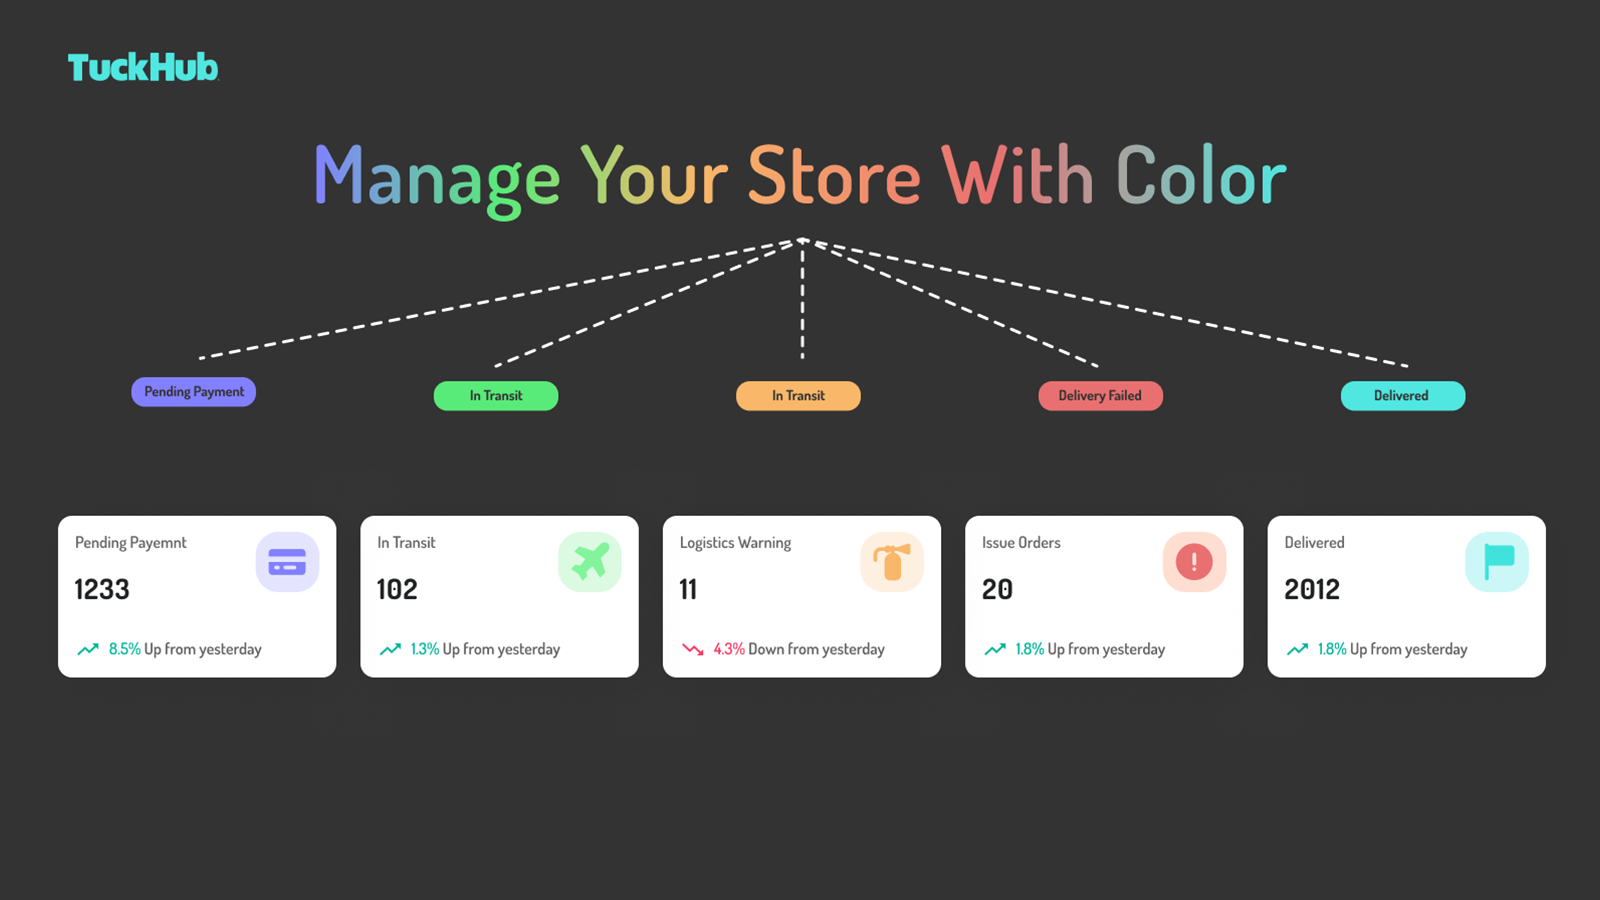 Manage orders and logistics with color, it’s so easy